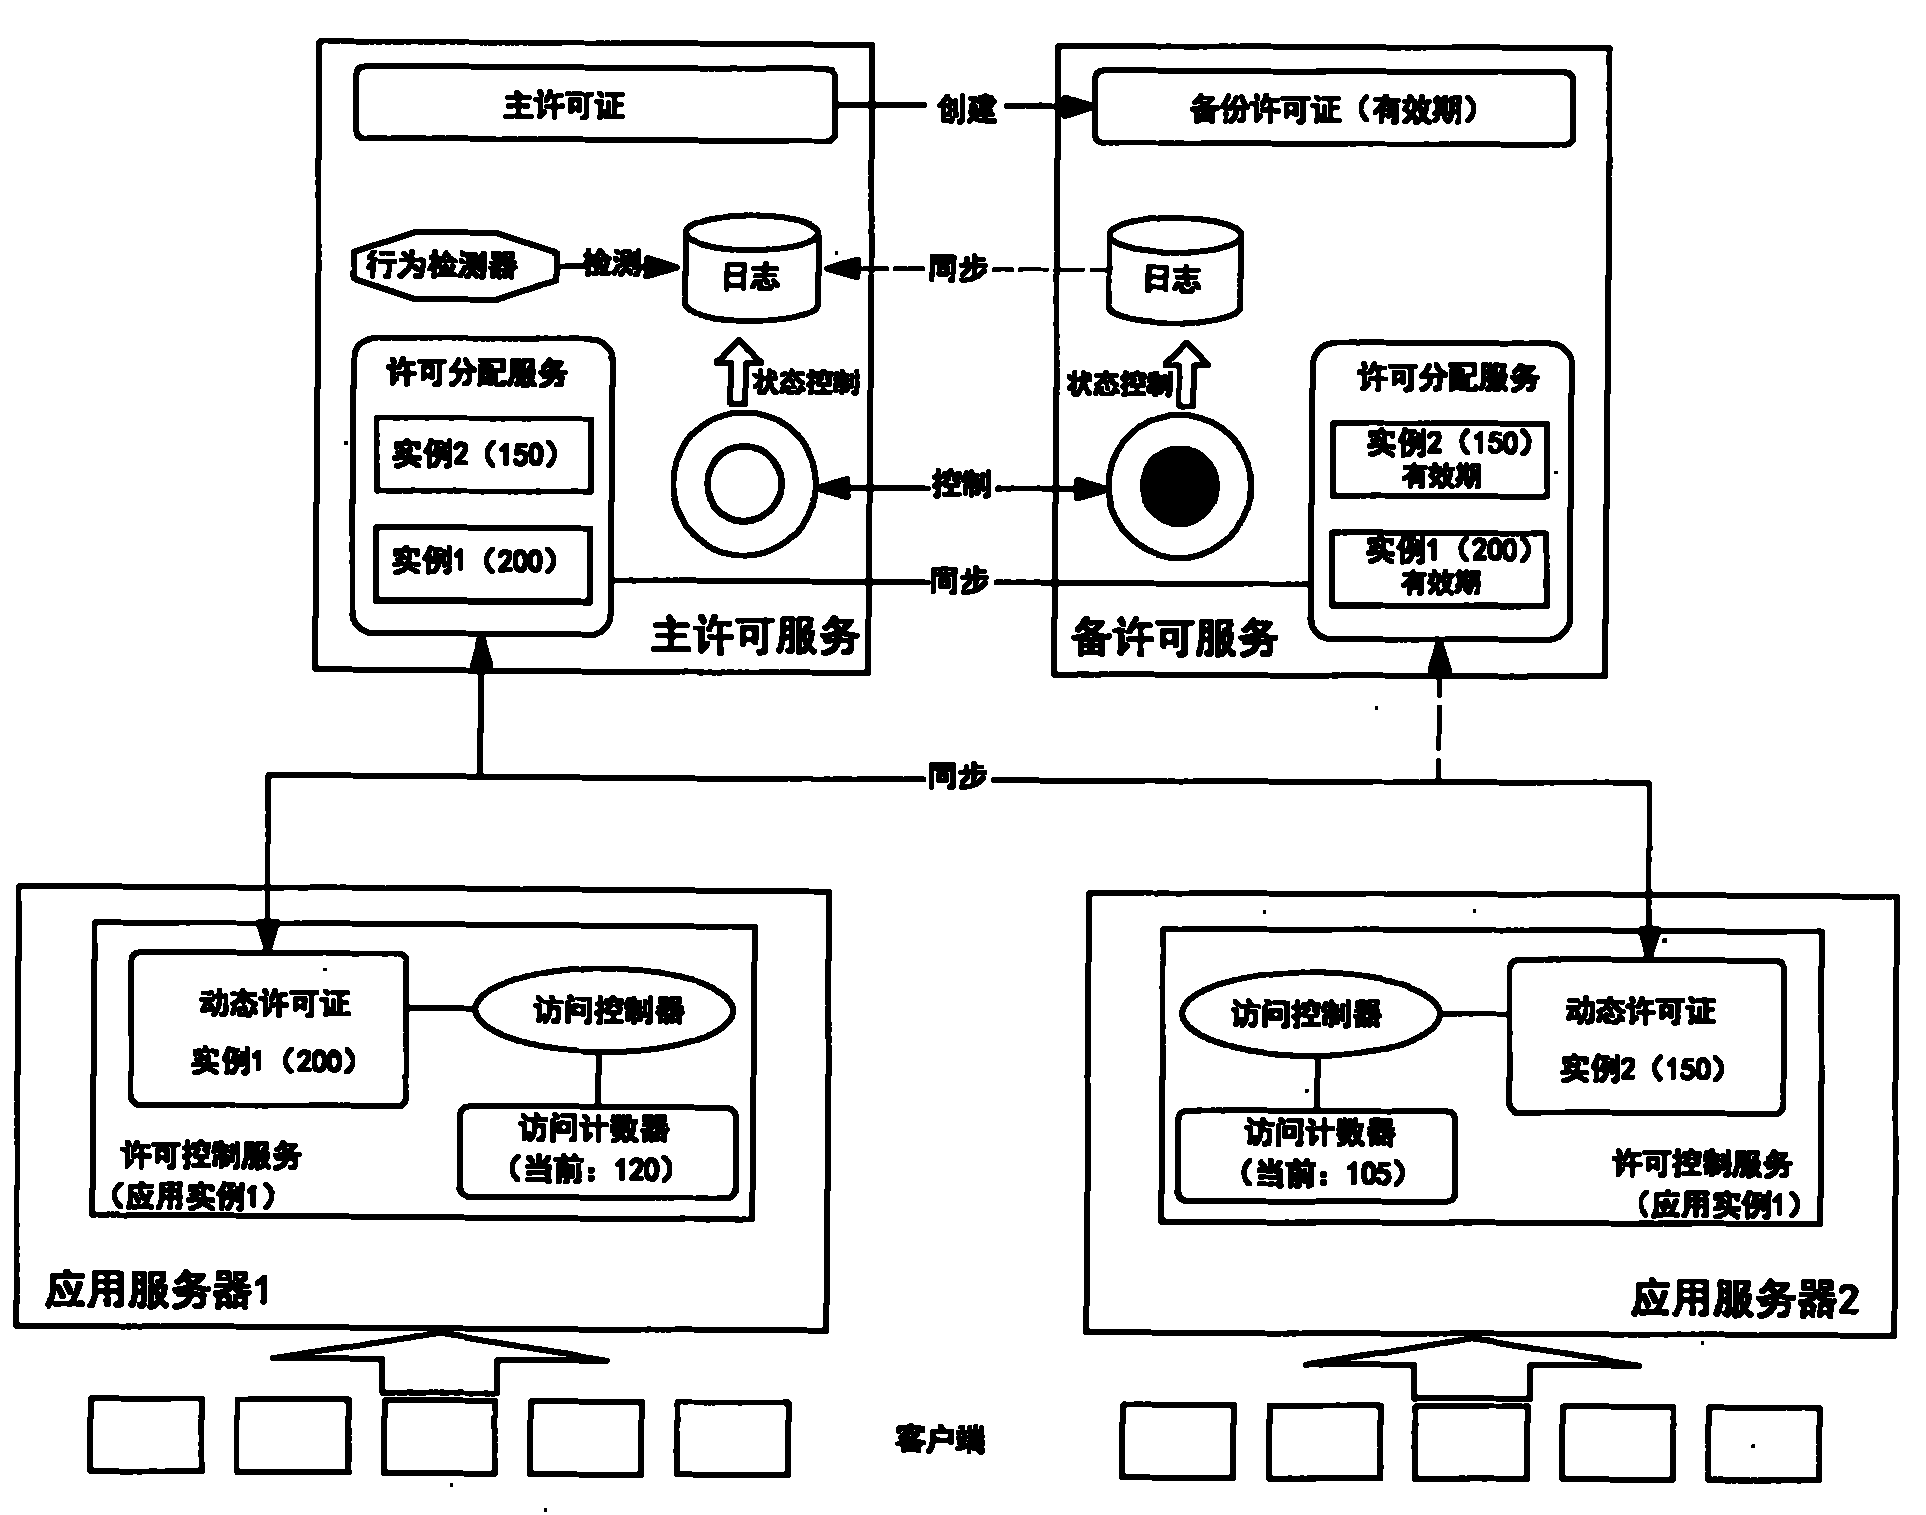 High-availability service terminal license control mode based on dynamic allocation and behavior analysis